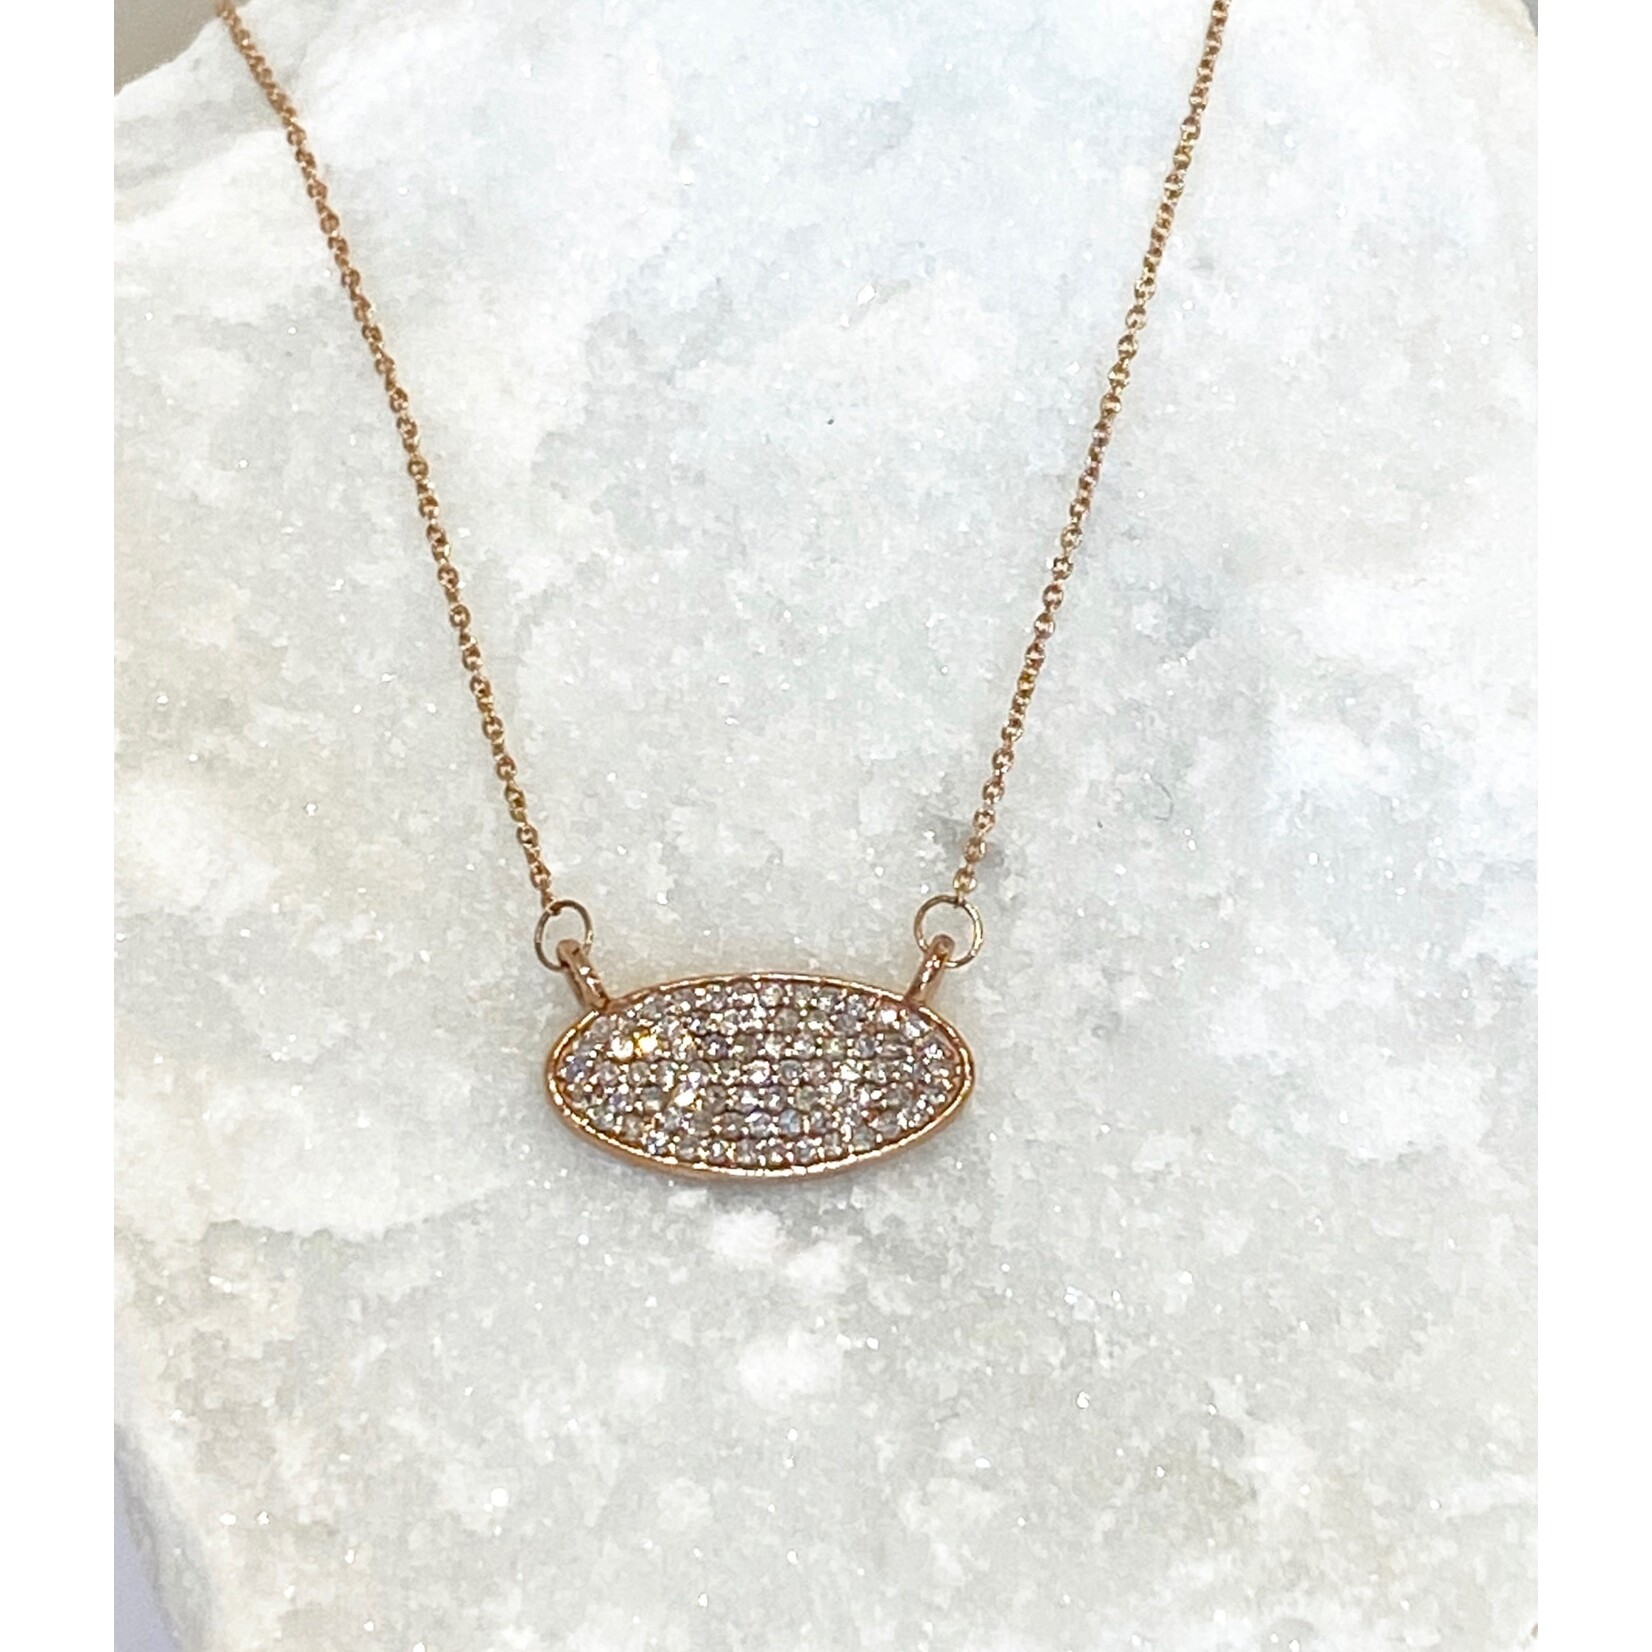 Andi Alyse Pave Diamond and Rose Gold Oval Necklace